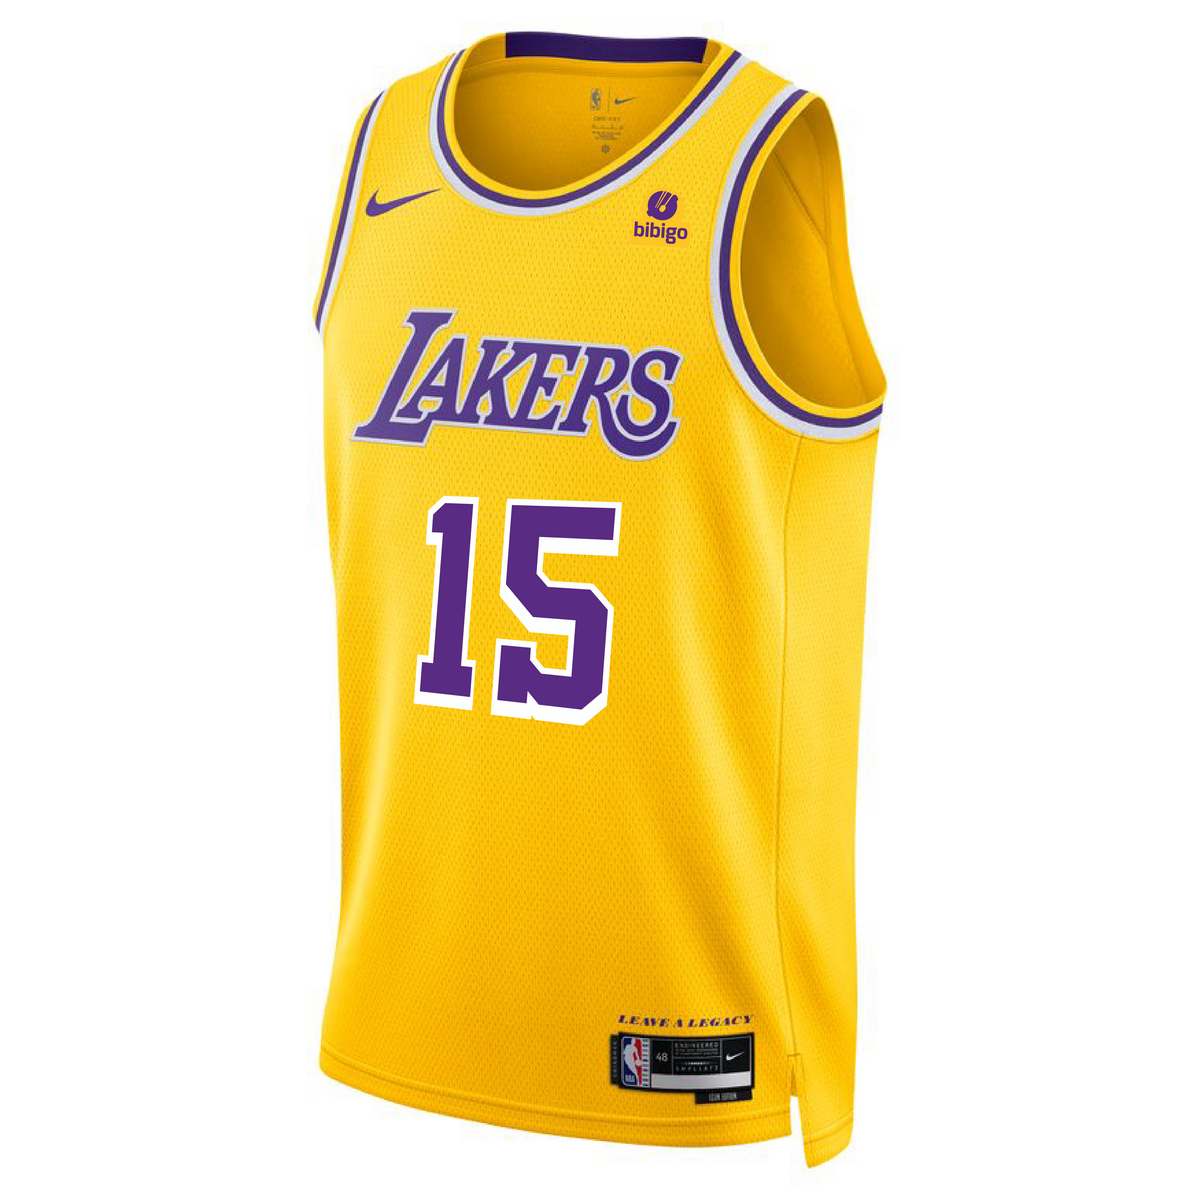 Outerstuff Nike Youth Los Angeles Lakers Austin Reaves #15 T-Shirt, Boys', Small, Yellow